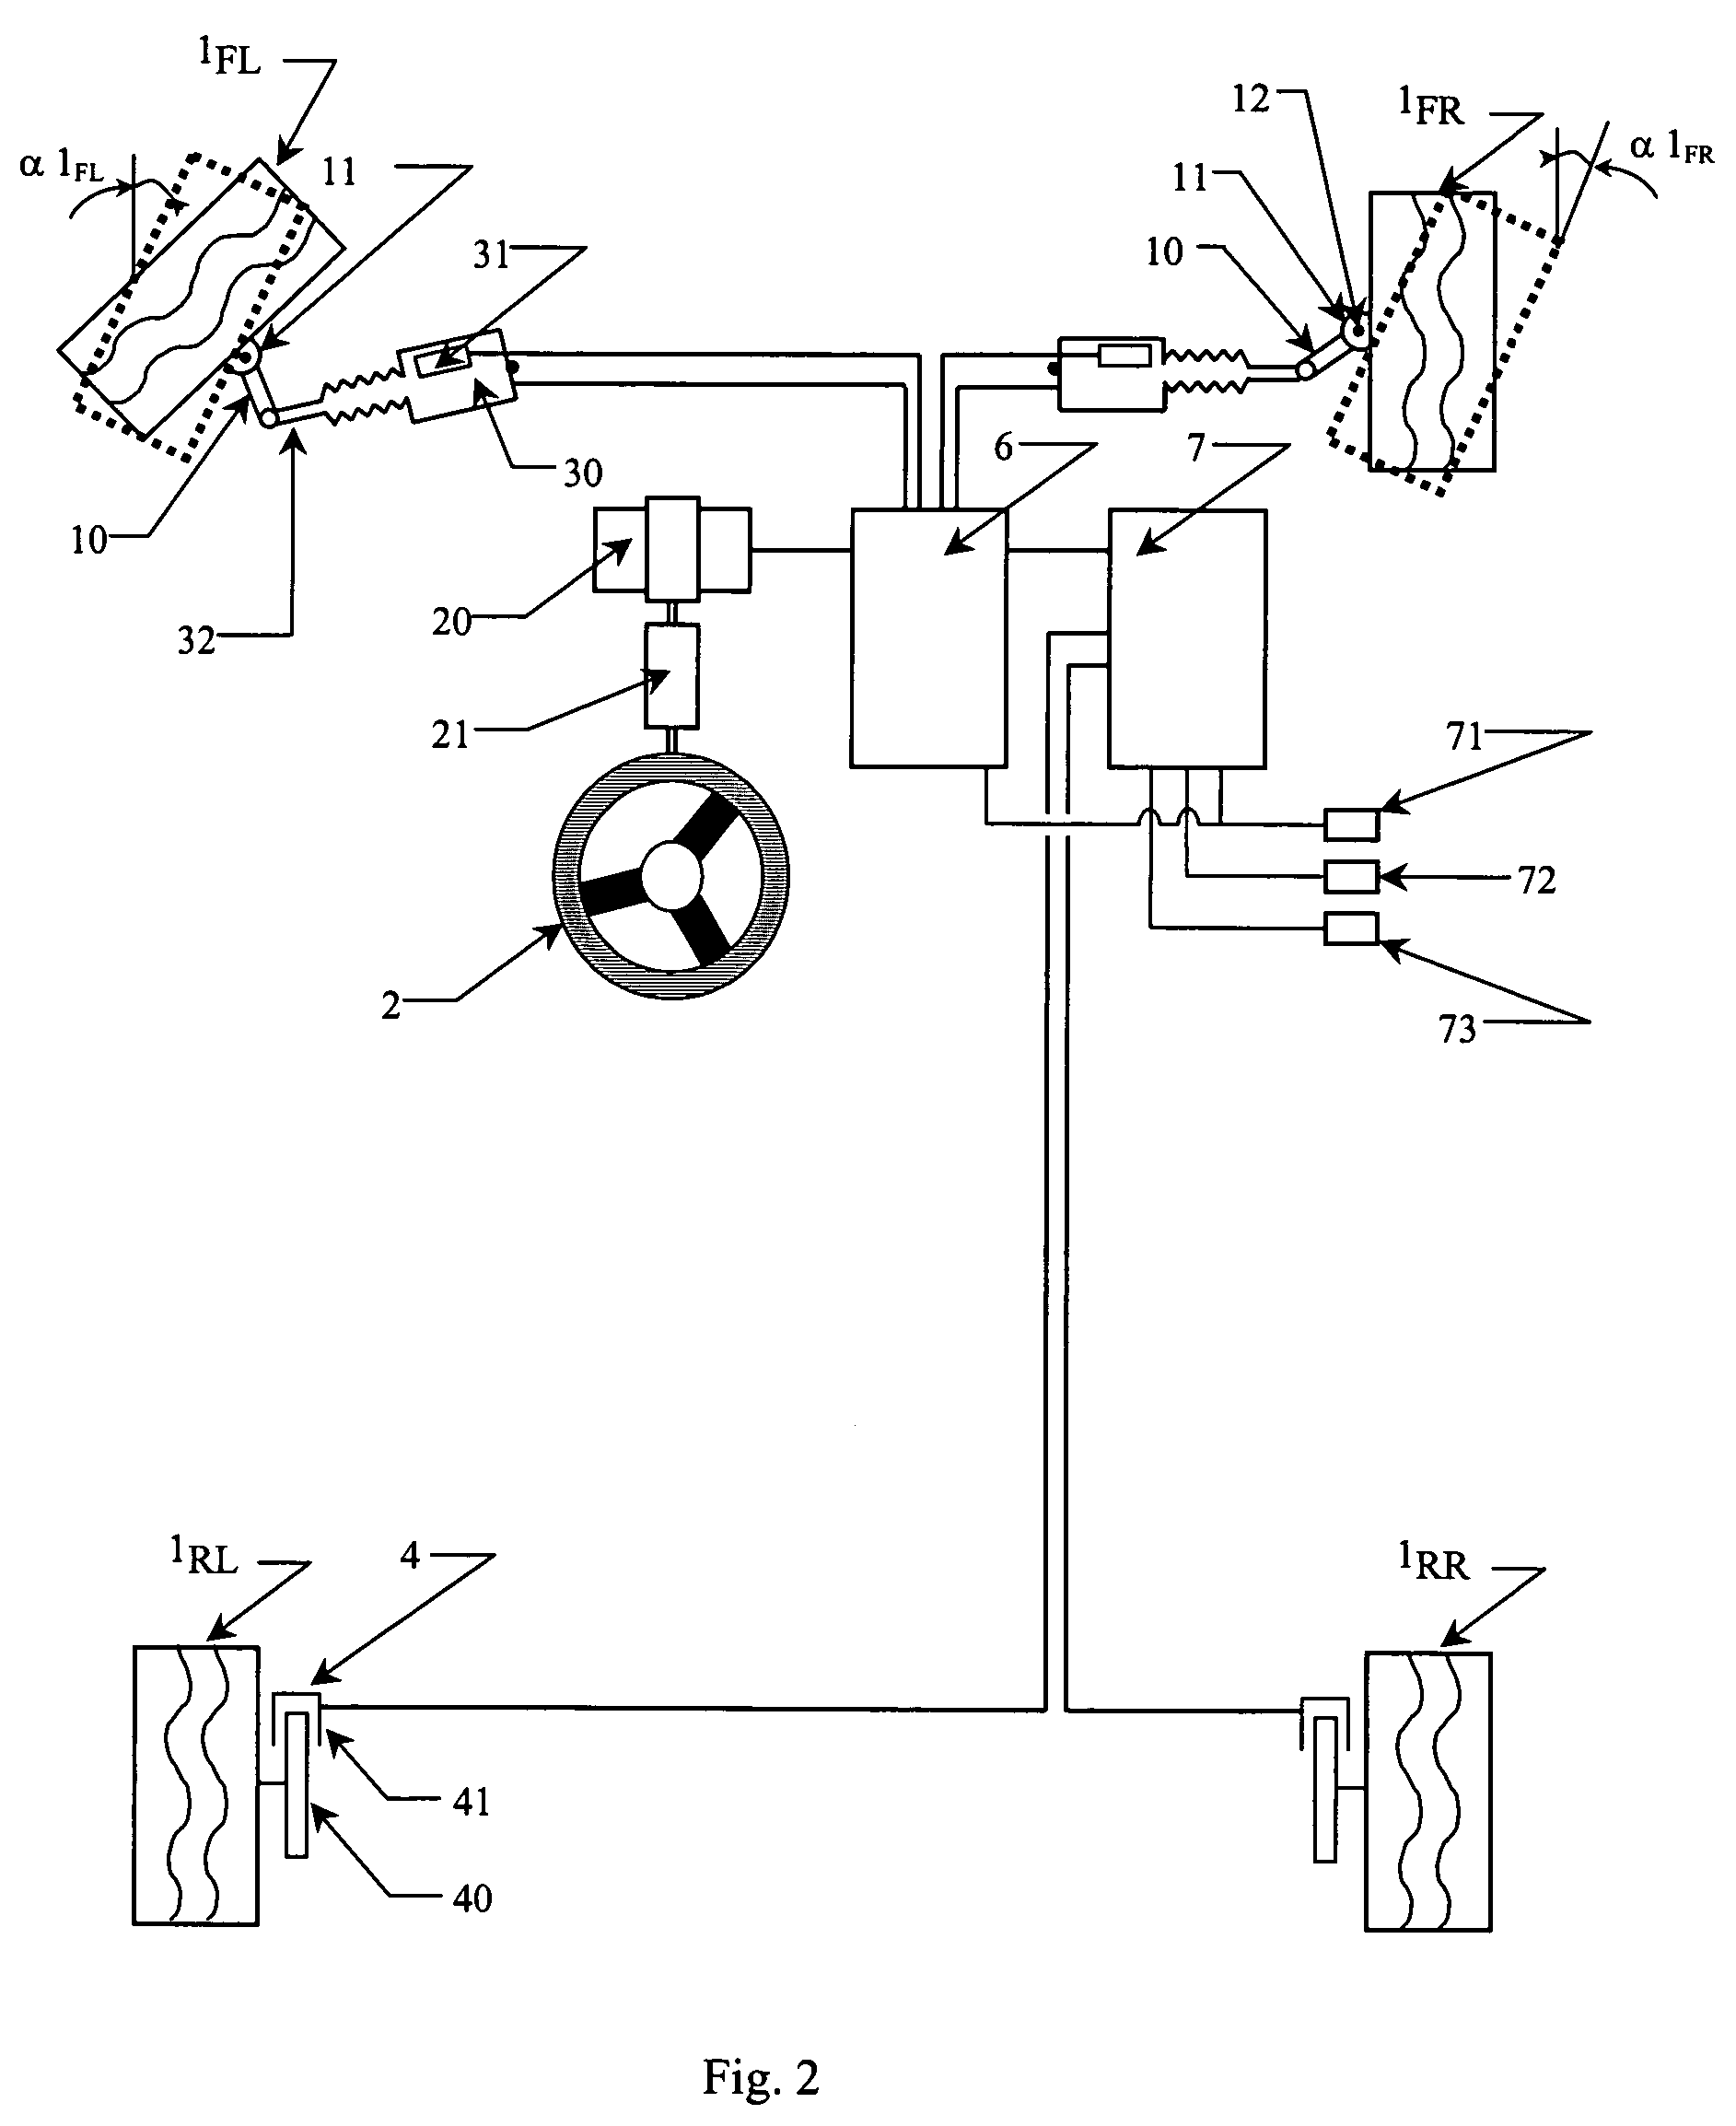 System for steering a vehicle, having a degraded mode in the event of failure of a wheel steering actuator